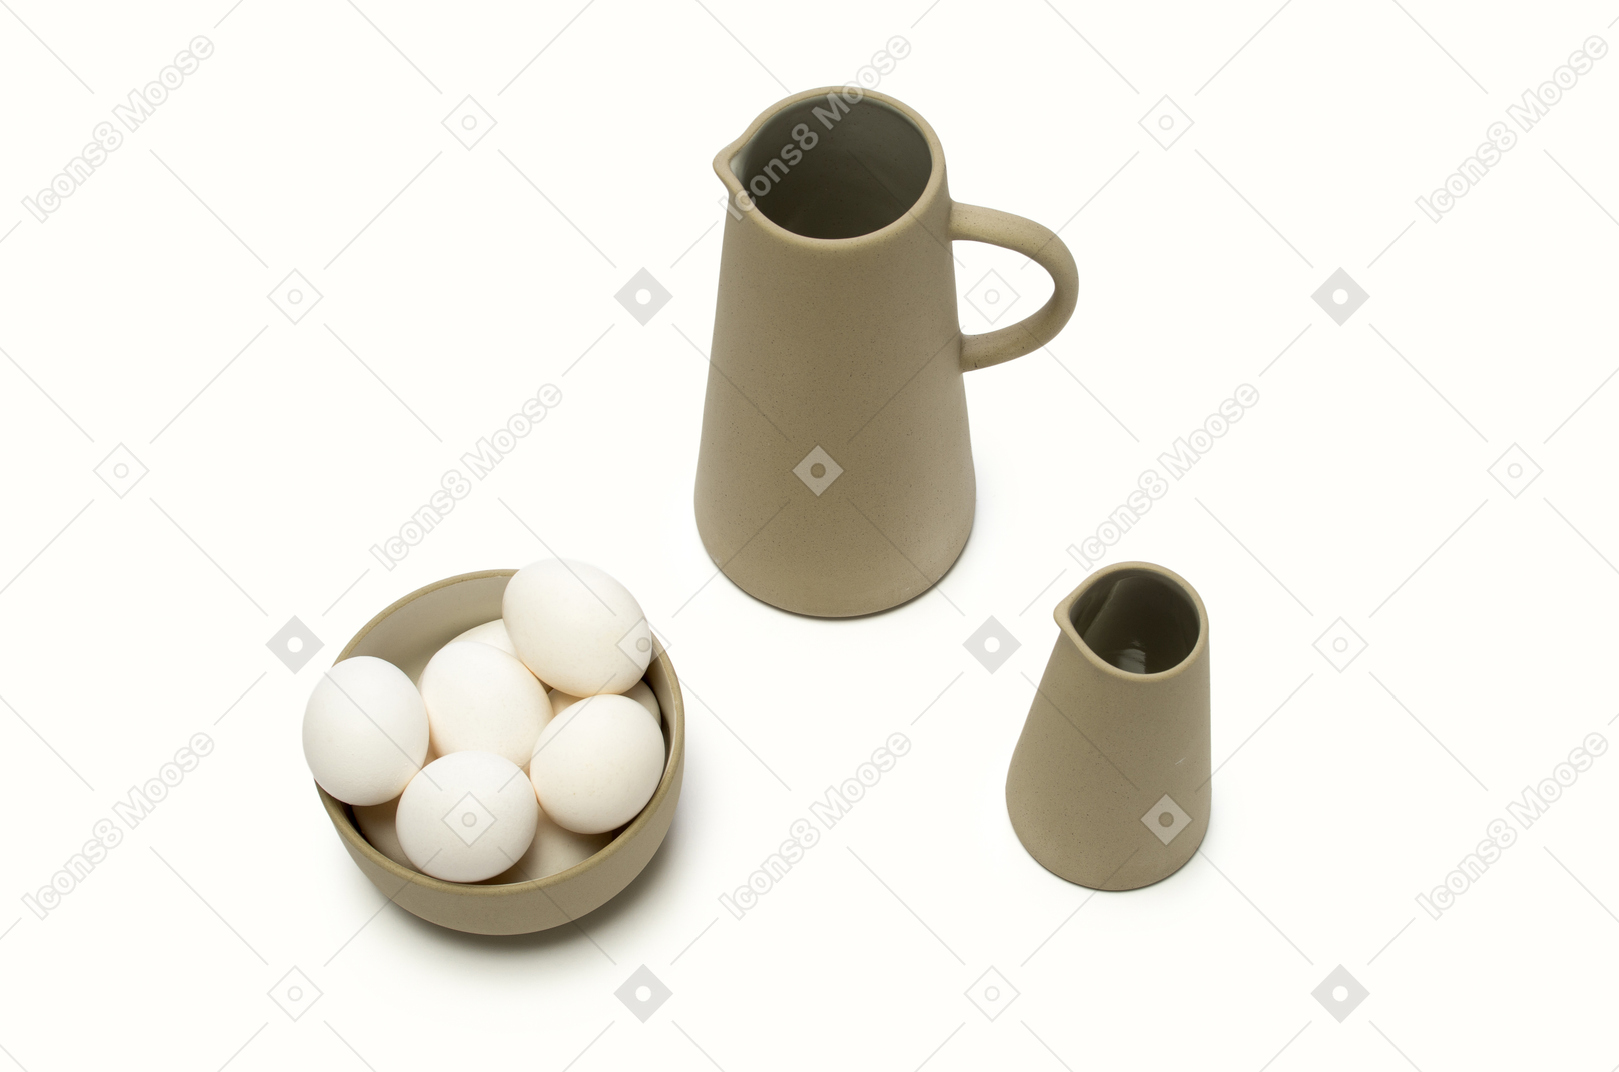 Chicken eggs in a bowl and jugs